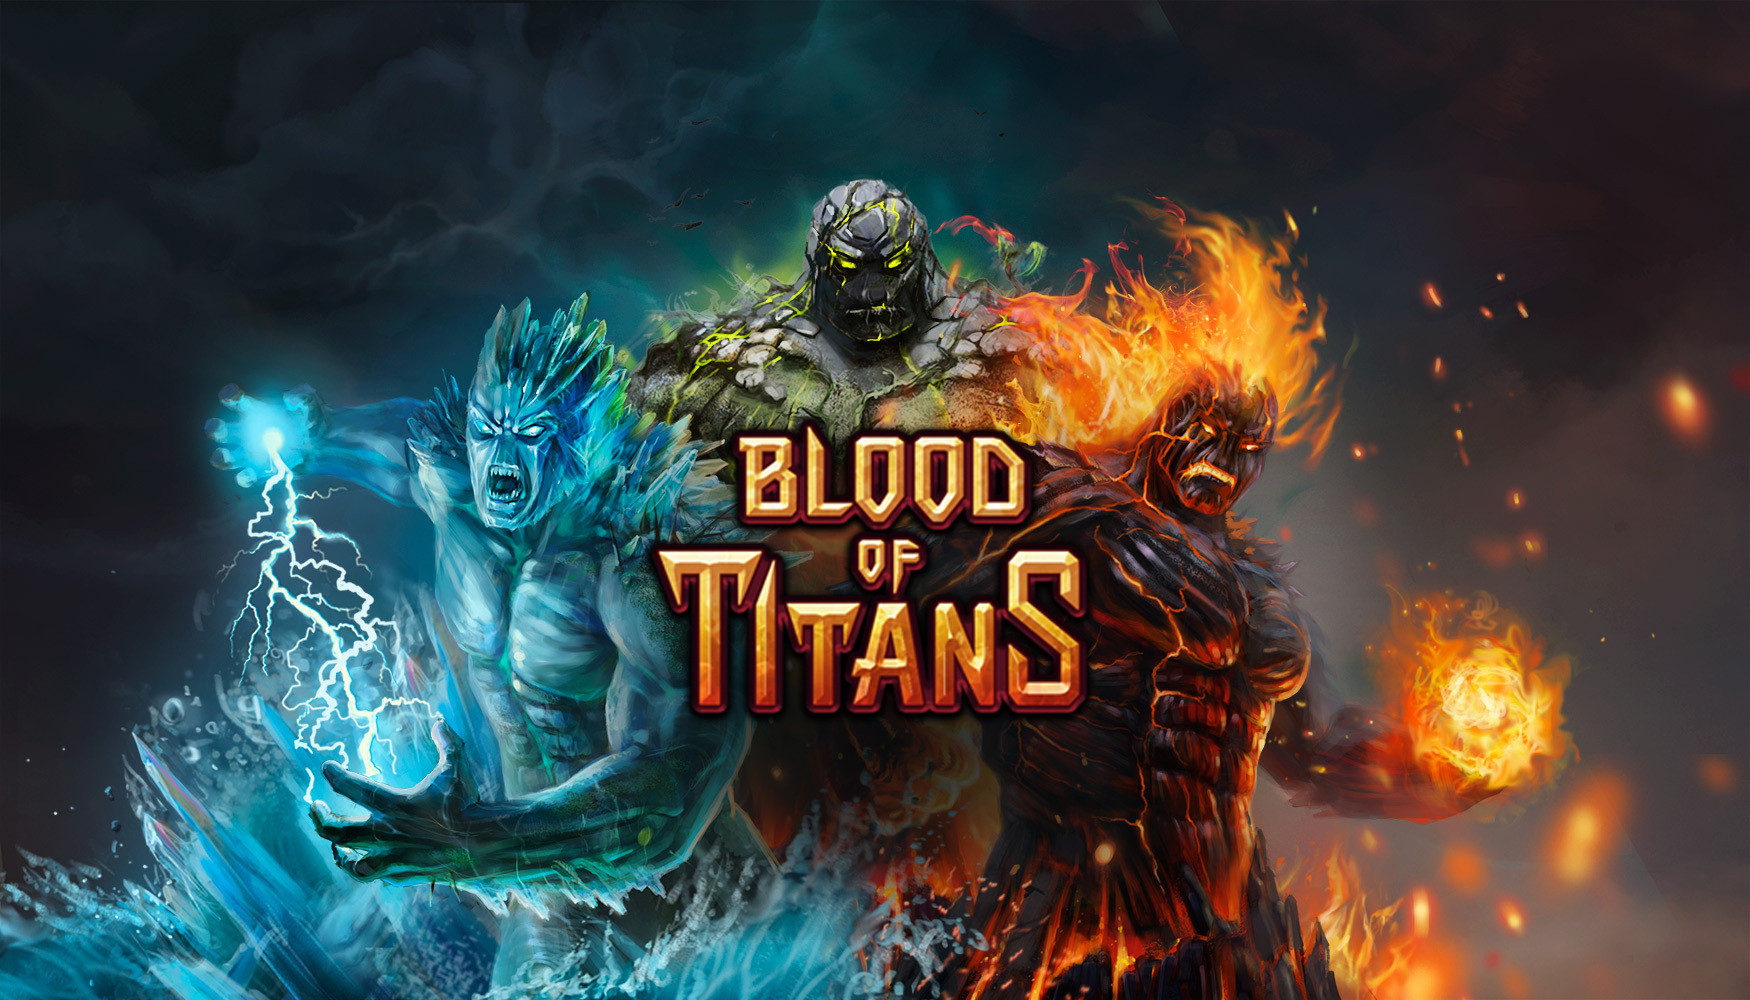 Battle of the titans steam фото 79